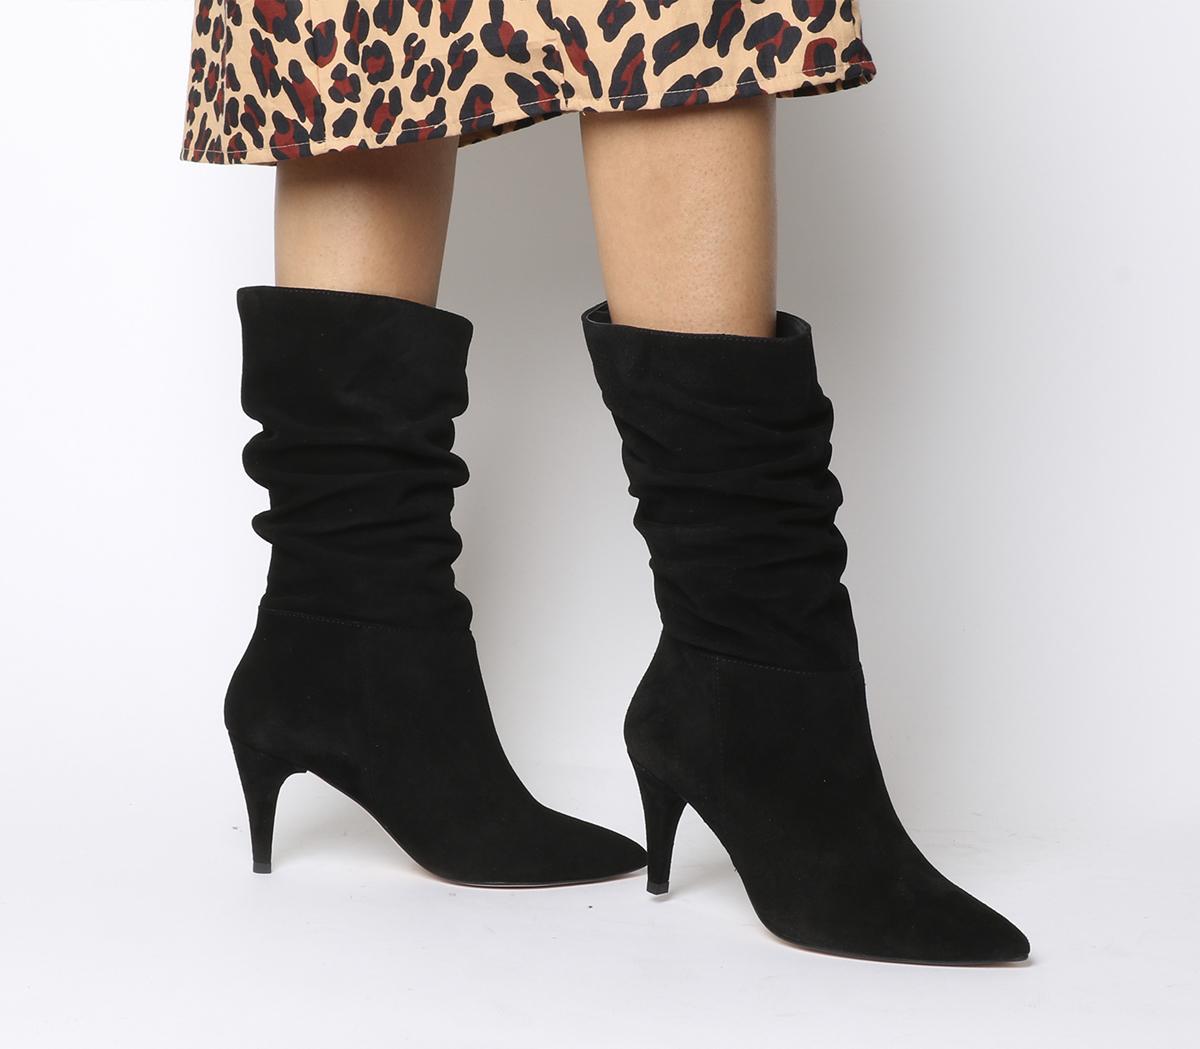 slouch boots suede